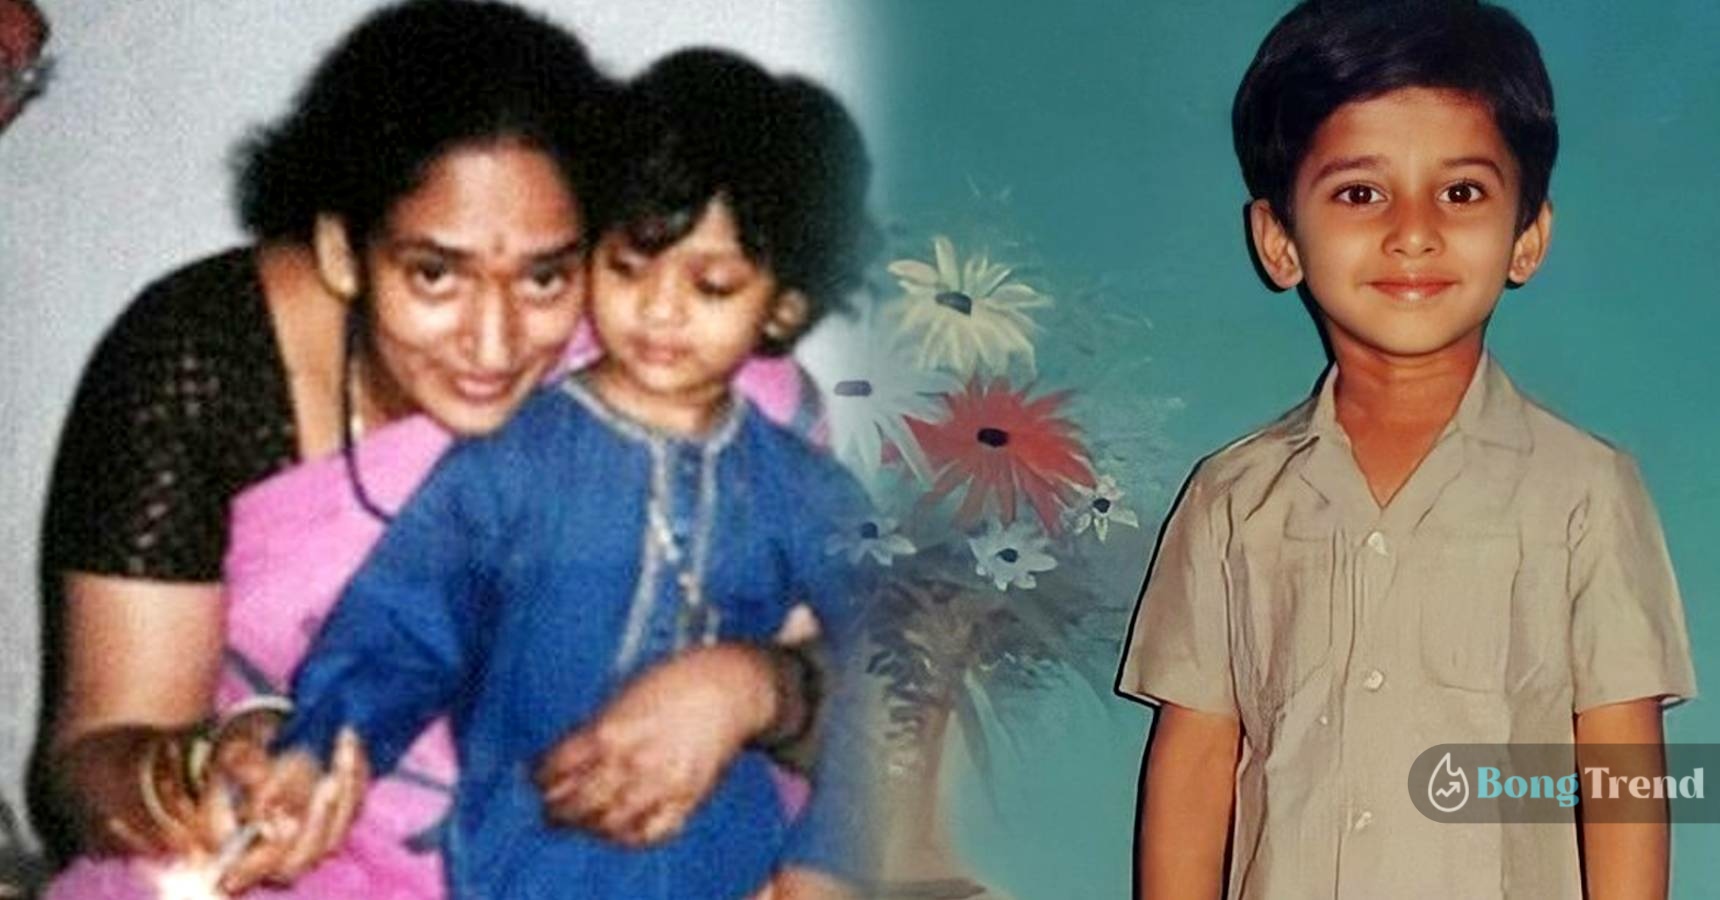 South Indian superstar Prabhas’s childhood picture goes viral